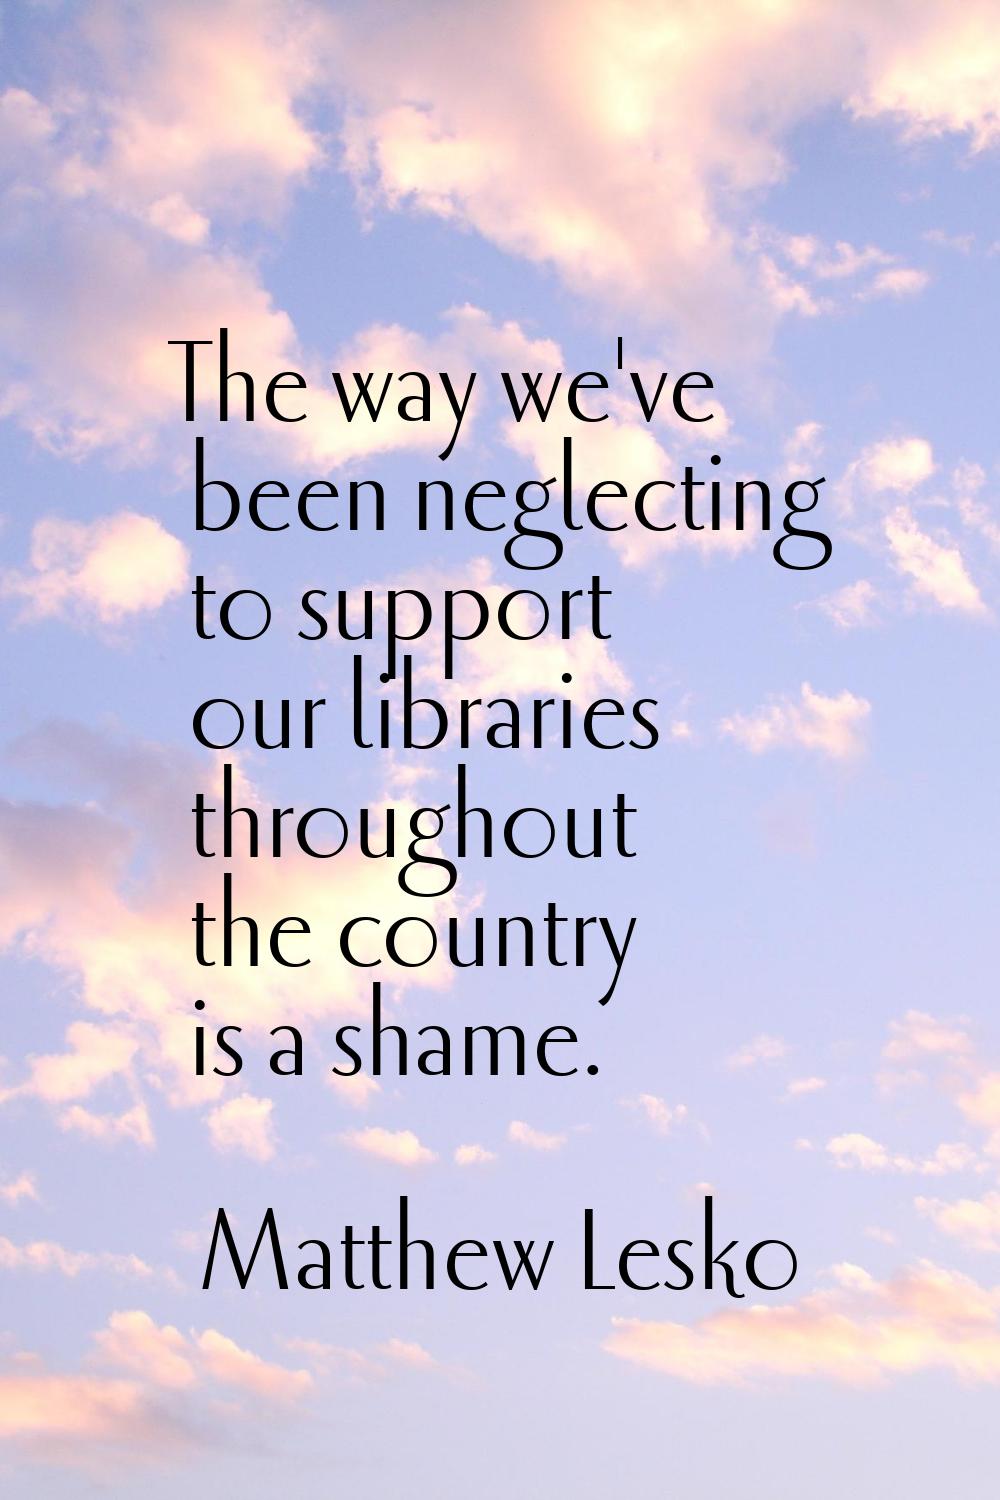 The way we've been neglecting to support our libraries throughout the country is a shame.